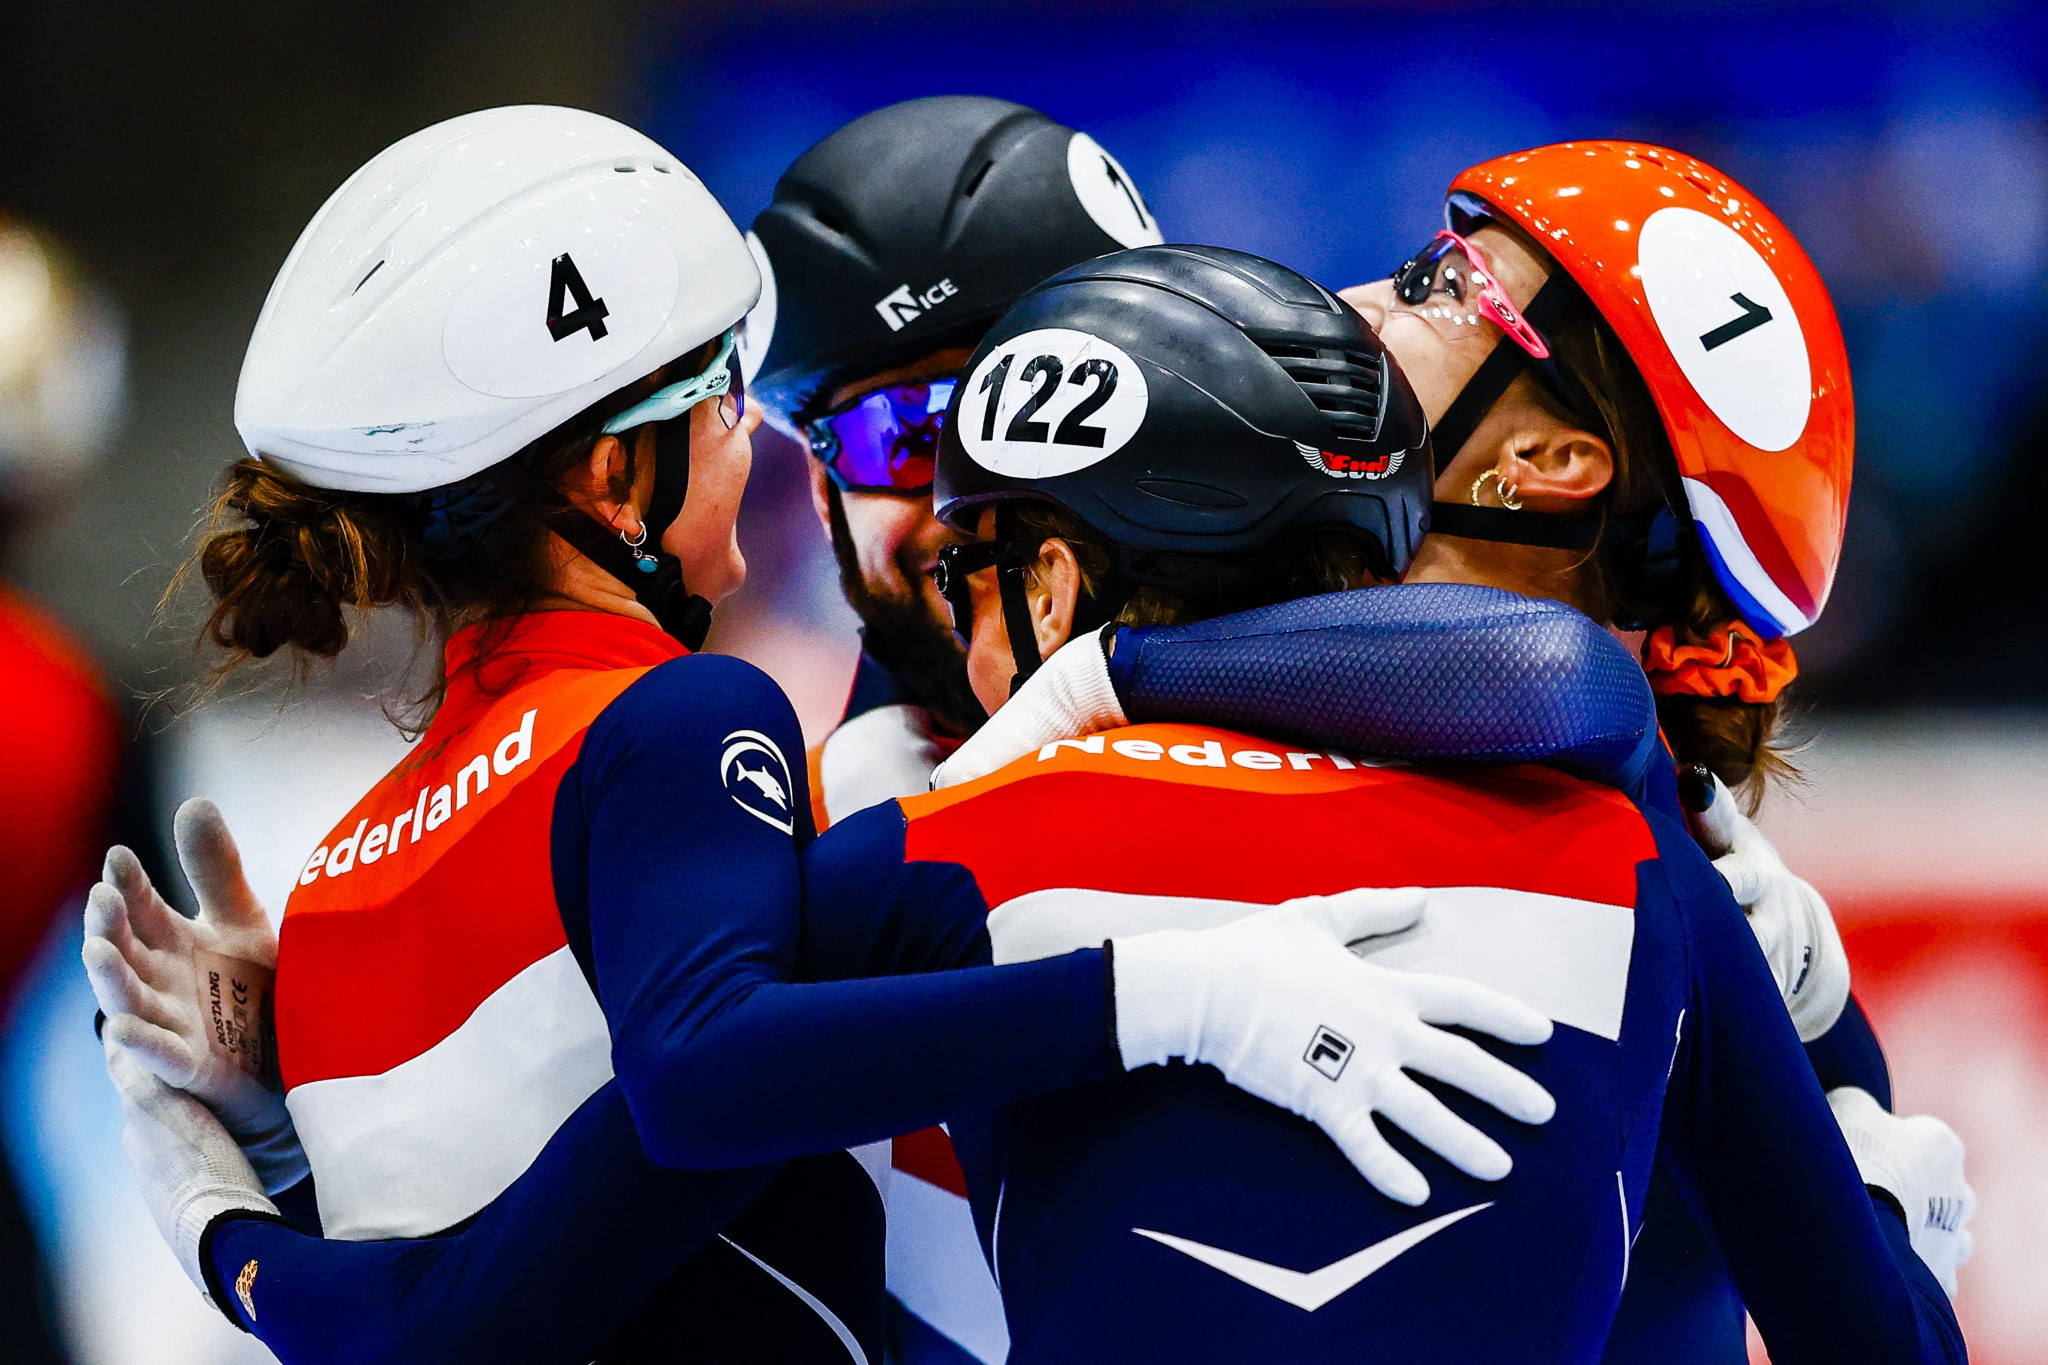 Double Dutch relay wins on last day of Short Track Speed Skating World Cup